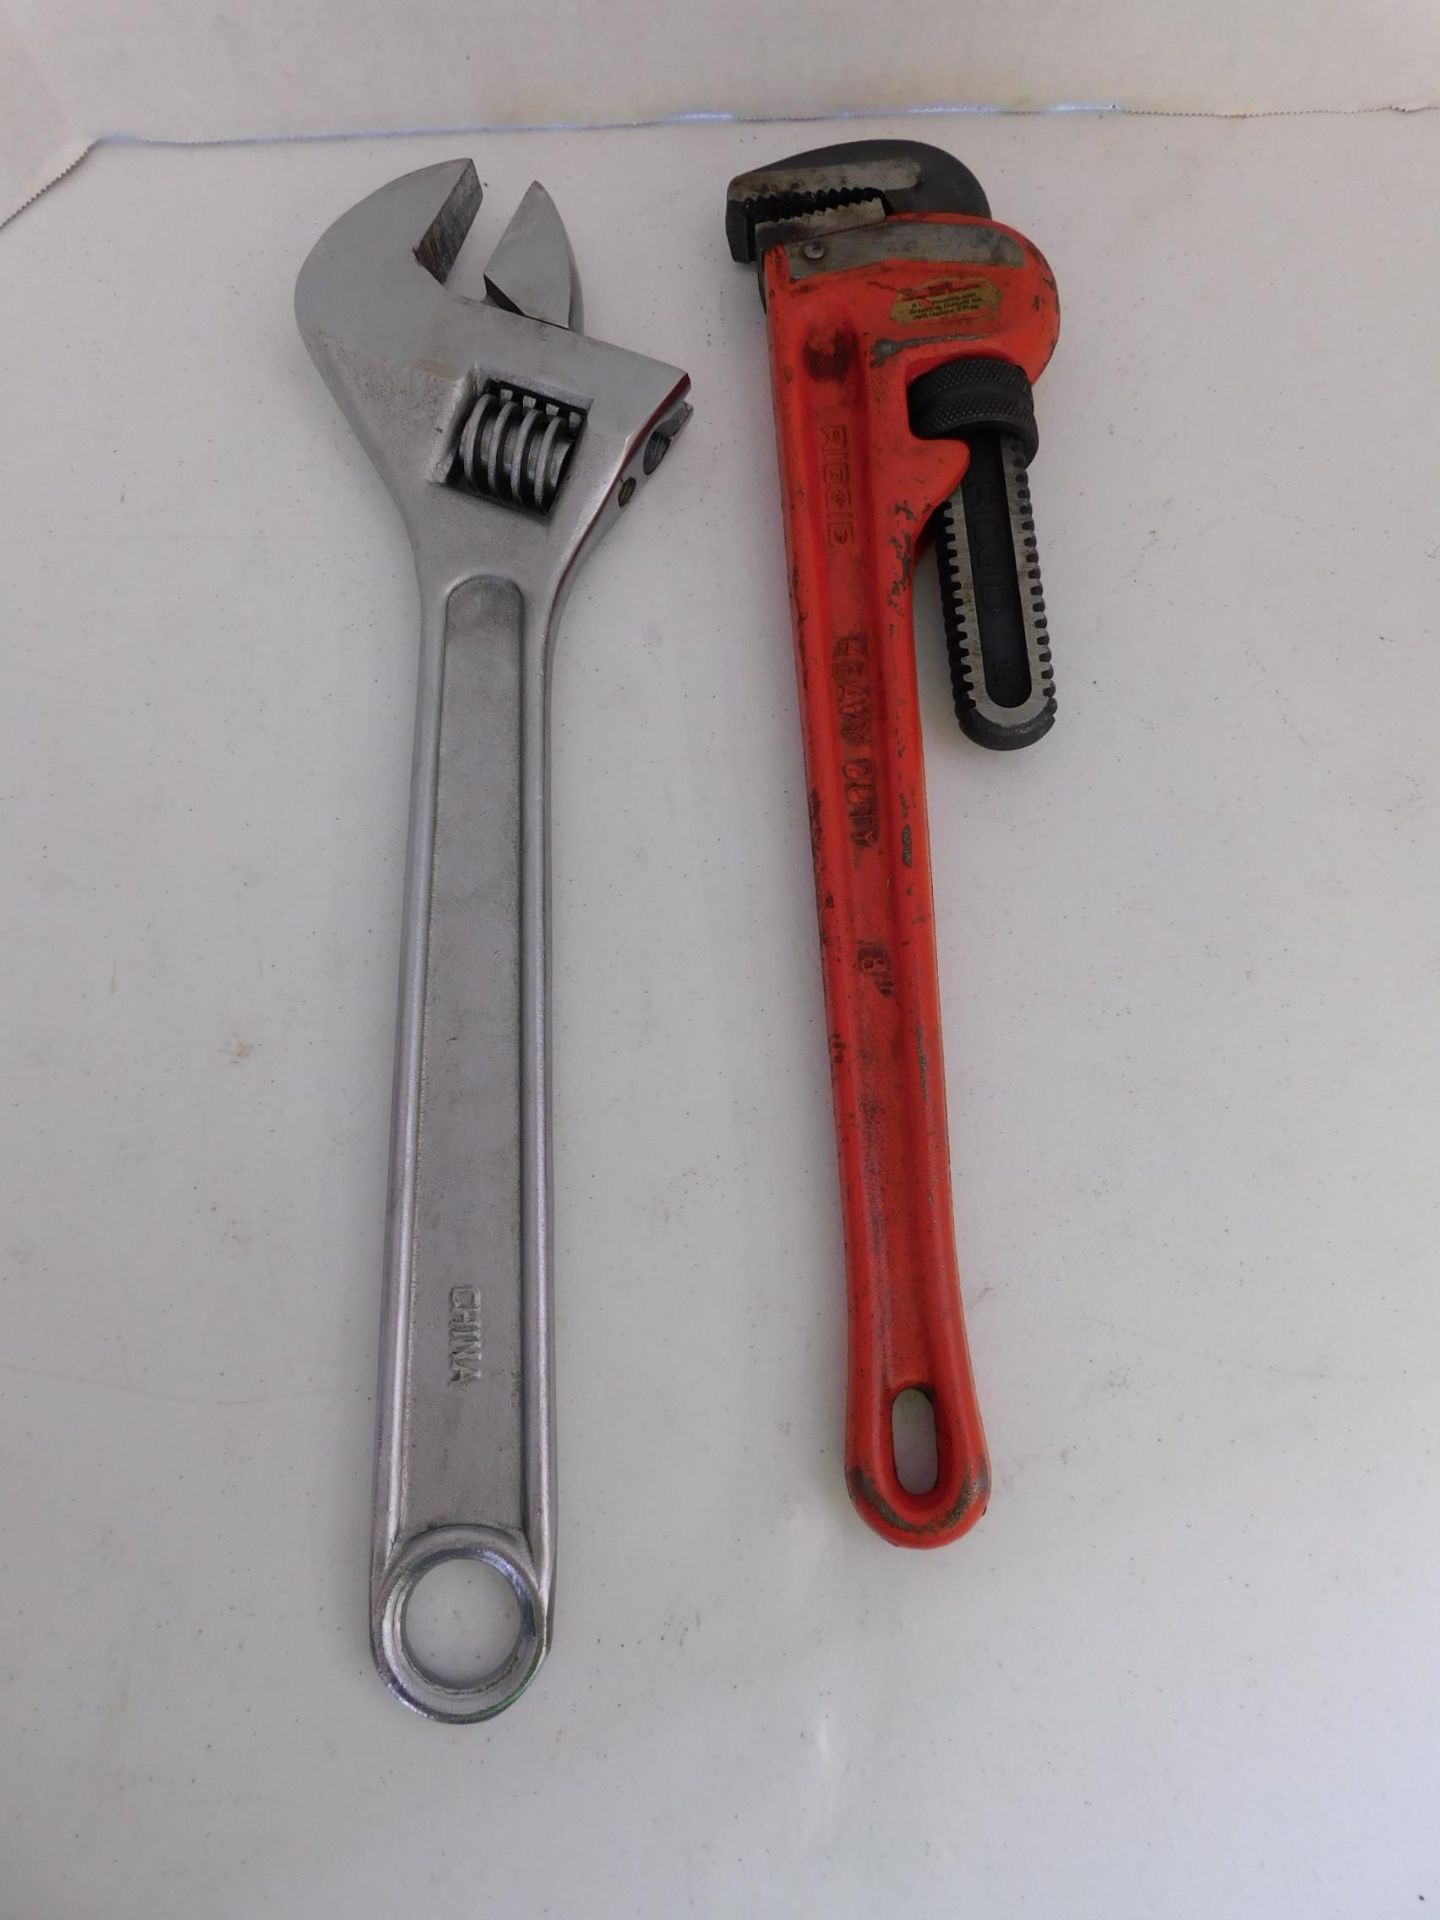 Ridgid 18" Pipe Wrench and Adjustable Wrench